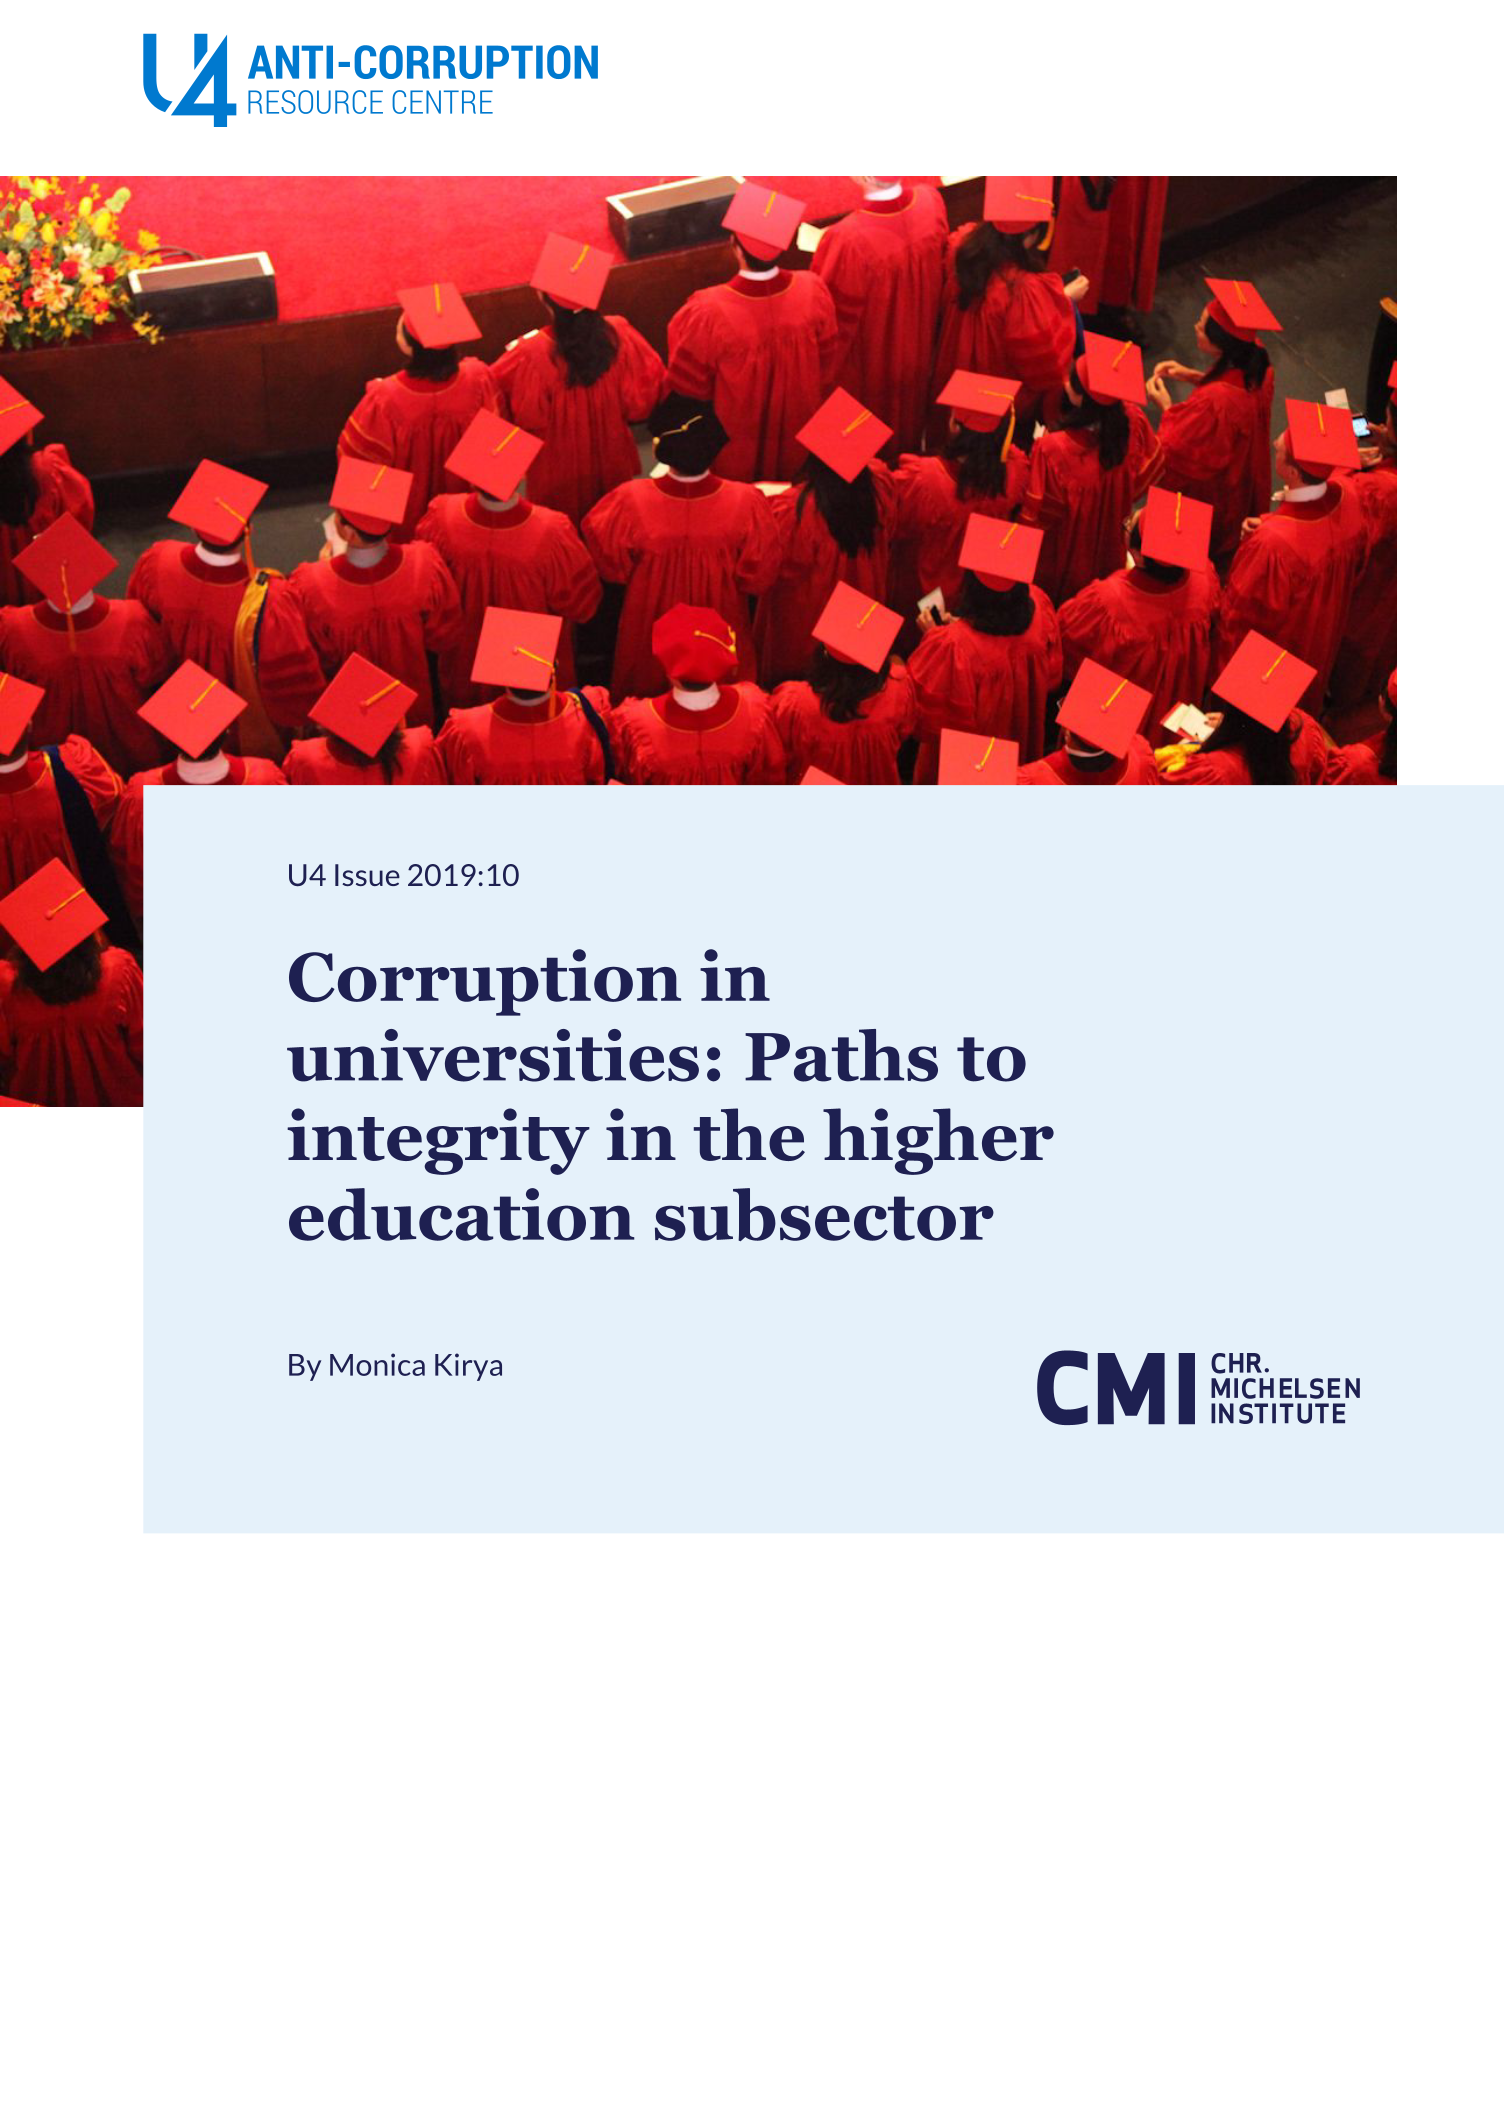 Corruption in universities: Paths to integrity in the higher education subsector